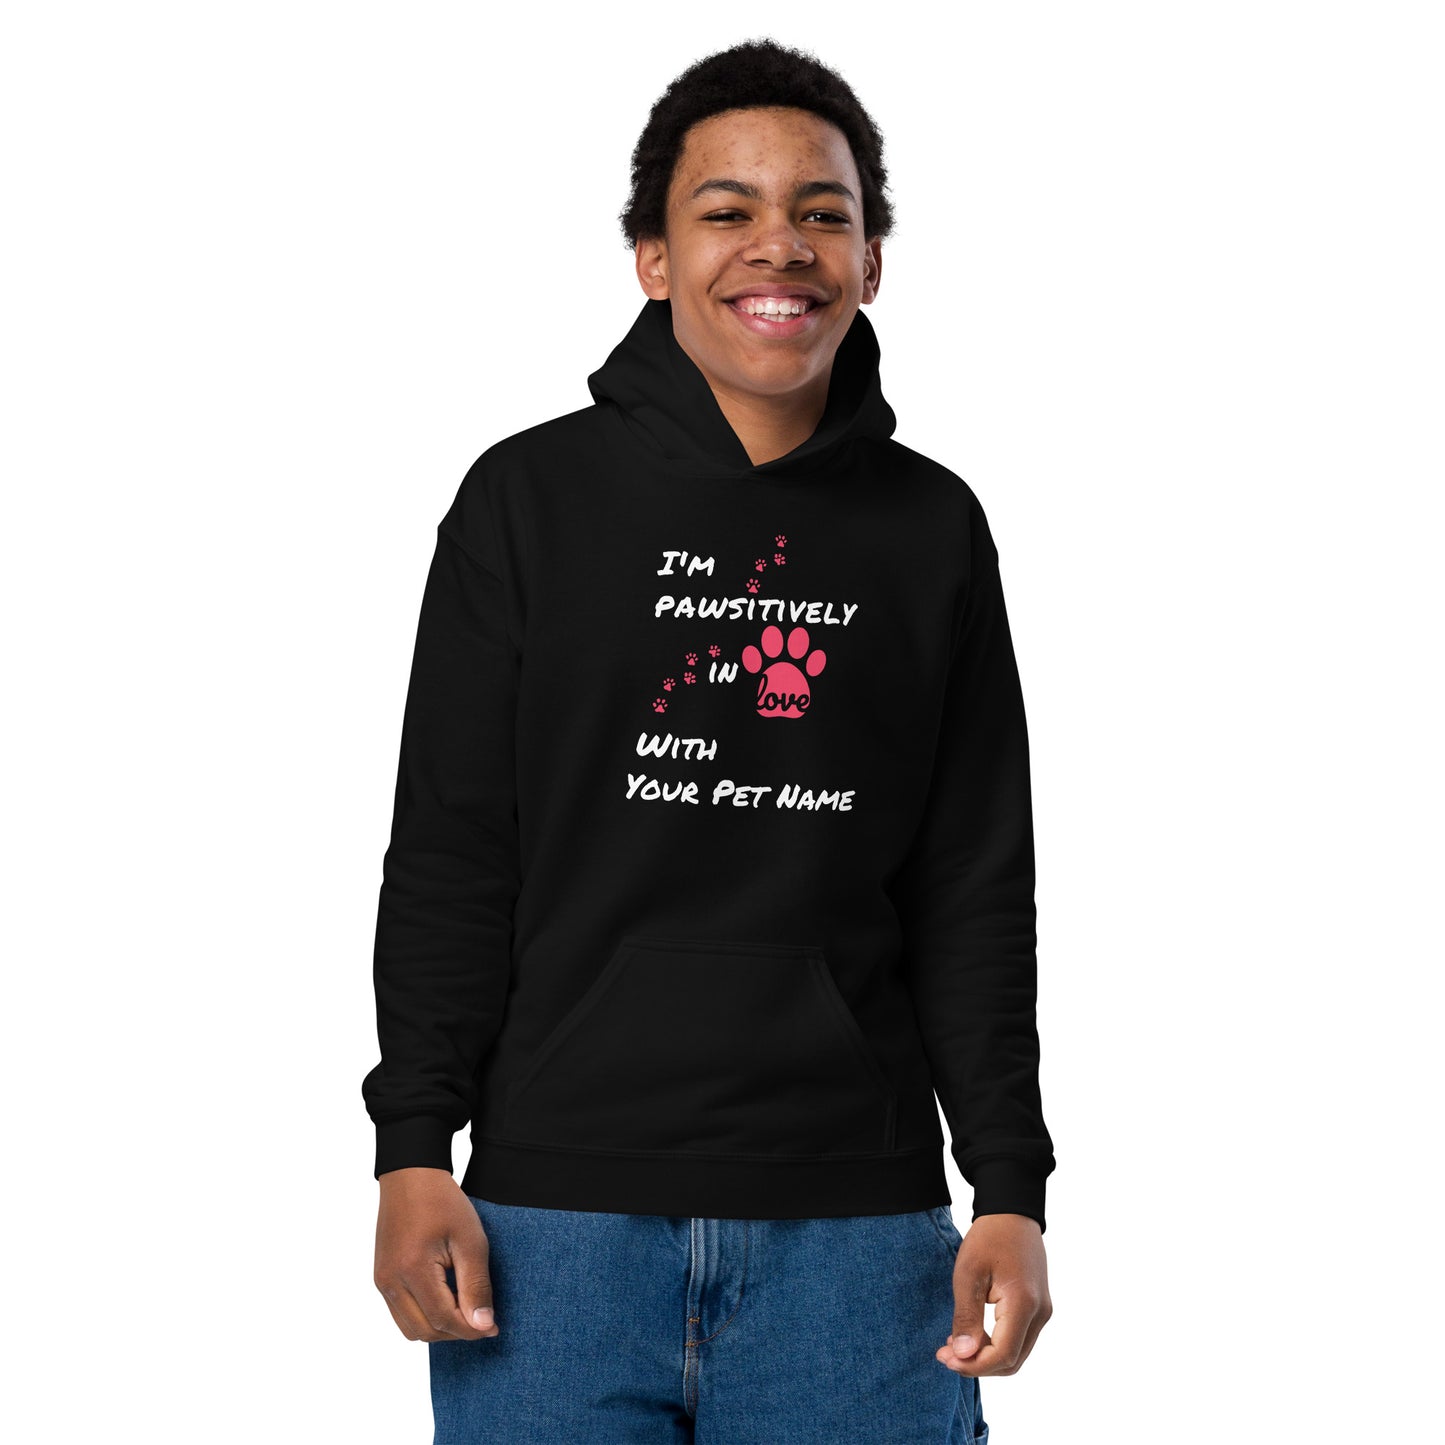 Youth Heavy Blend Hoodie - Pawsitively in Love (PERSONALIZED)